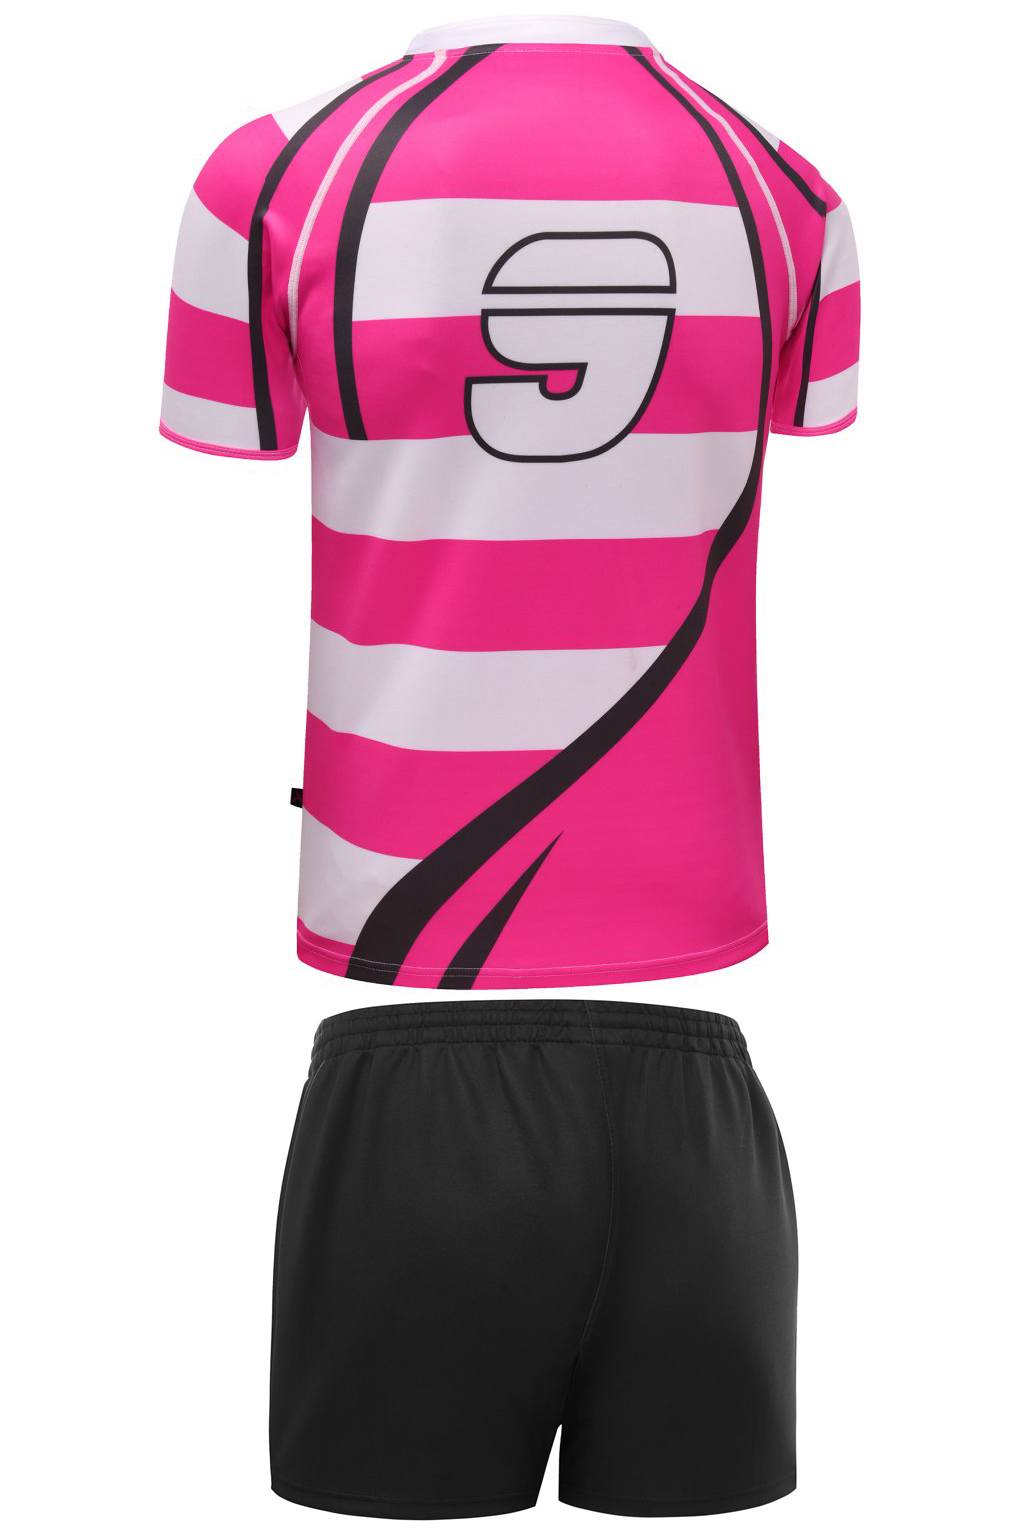 BEACH RUGBY JERSEY-PLAYER FIT-R1112PWG